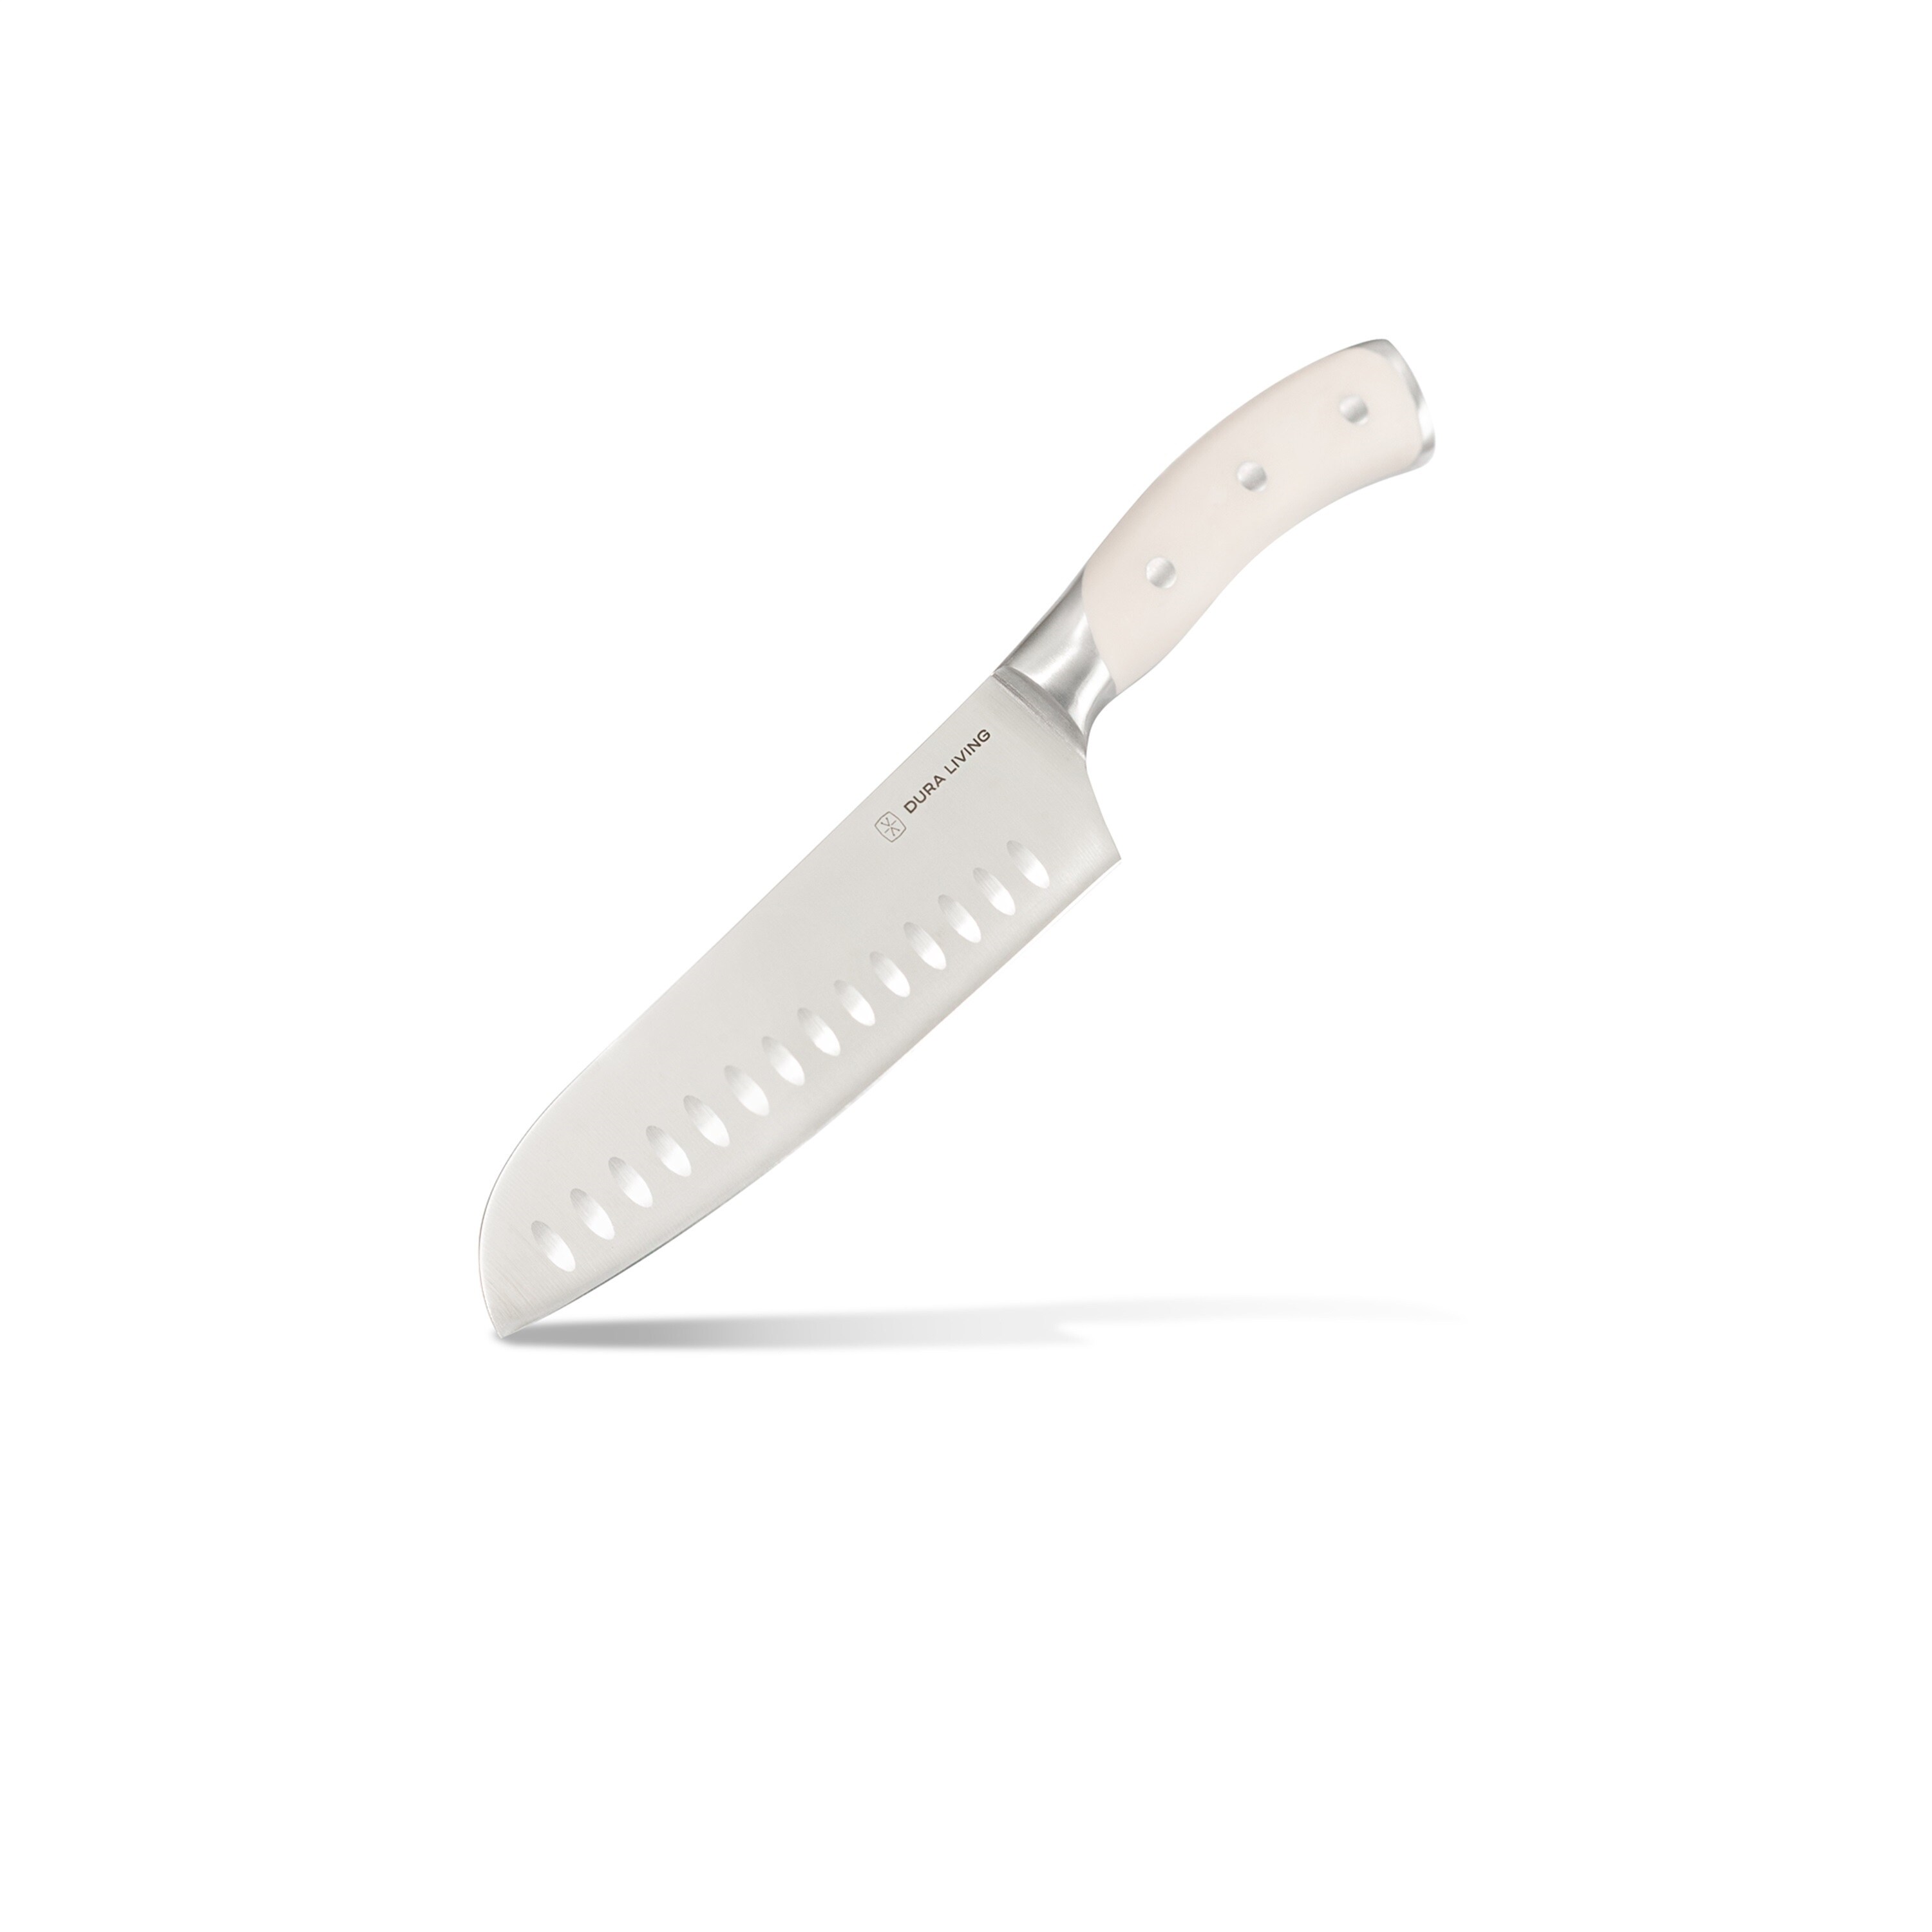 https://ak1.ostkcdn.com/images/products/is/images/direct/245b72dd587eb52c25d21e816f40787a8a47c769/Dura-Living-Elite-7-inch-Santoku-Knife---Forged-High-Carbon-German-Stainless-Steel-Blade%2C-Black.jpg